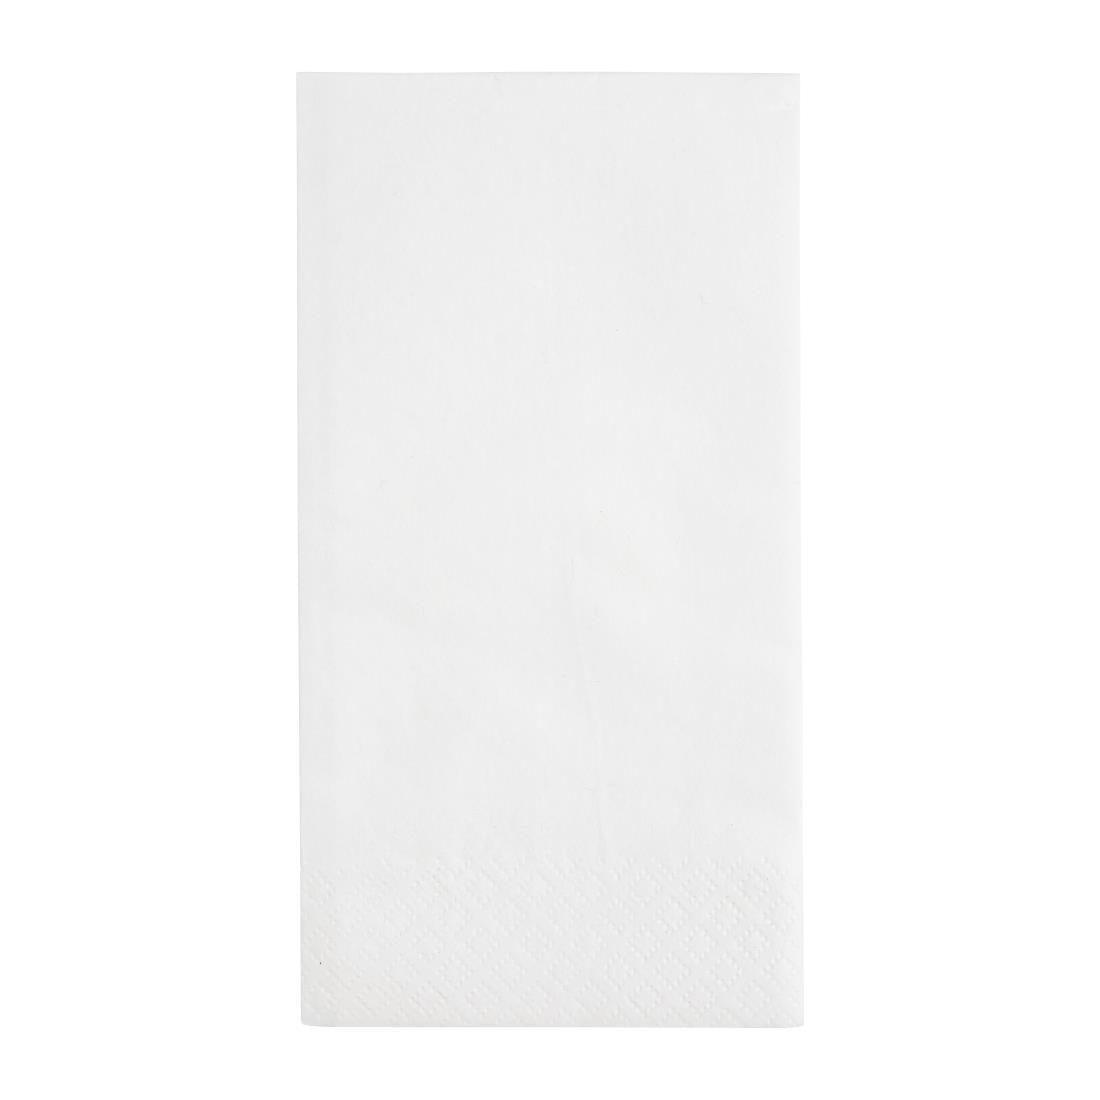 FE227 Fiesta Recyclable Lunch Napkin White 33x33cm 2ply 1/8 Fold (Pack of 2000) JD Catering Equipment Solutions Ltd